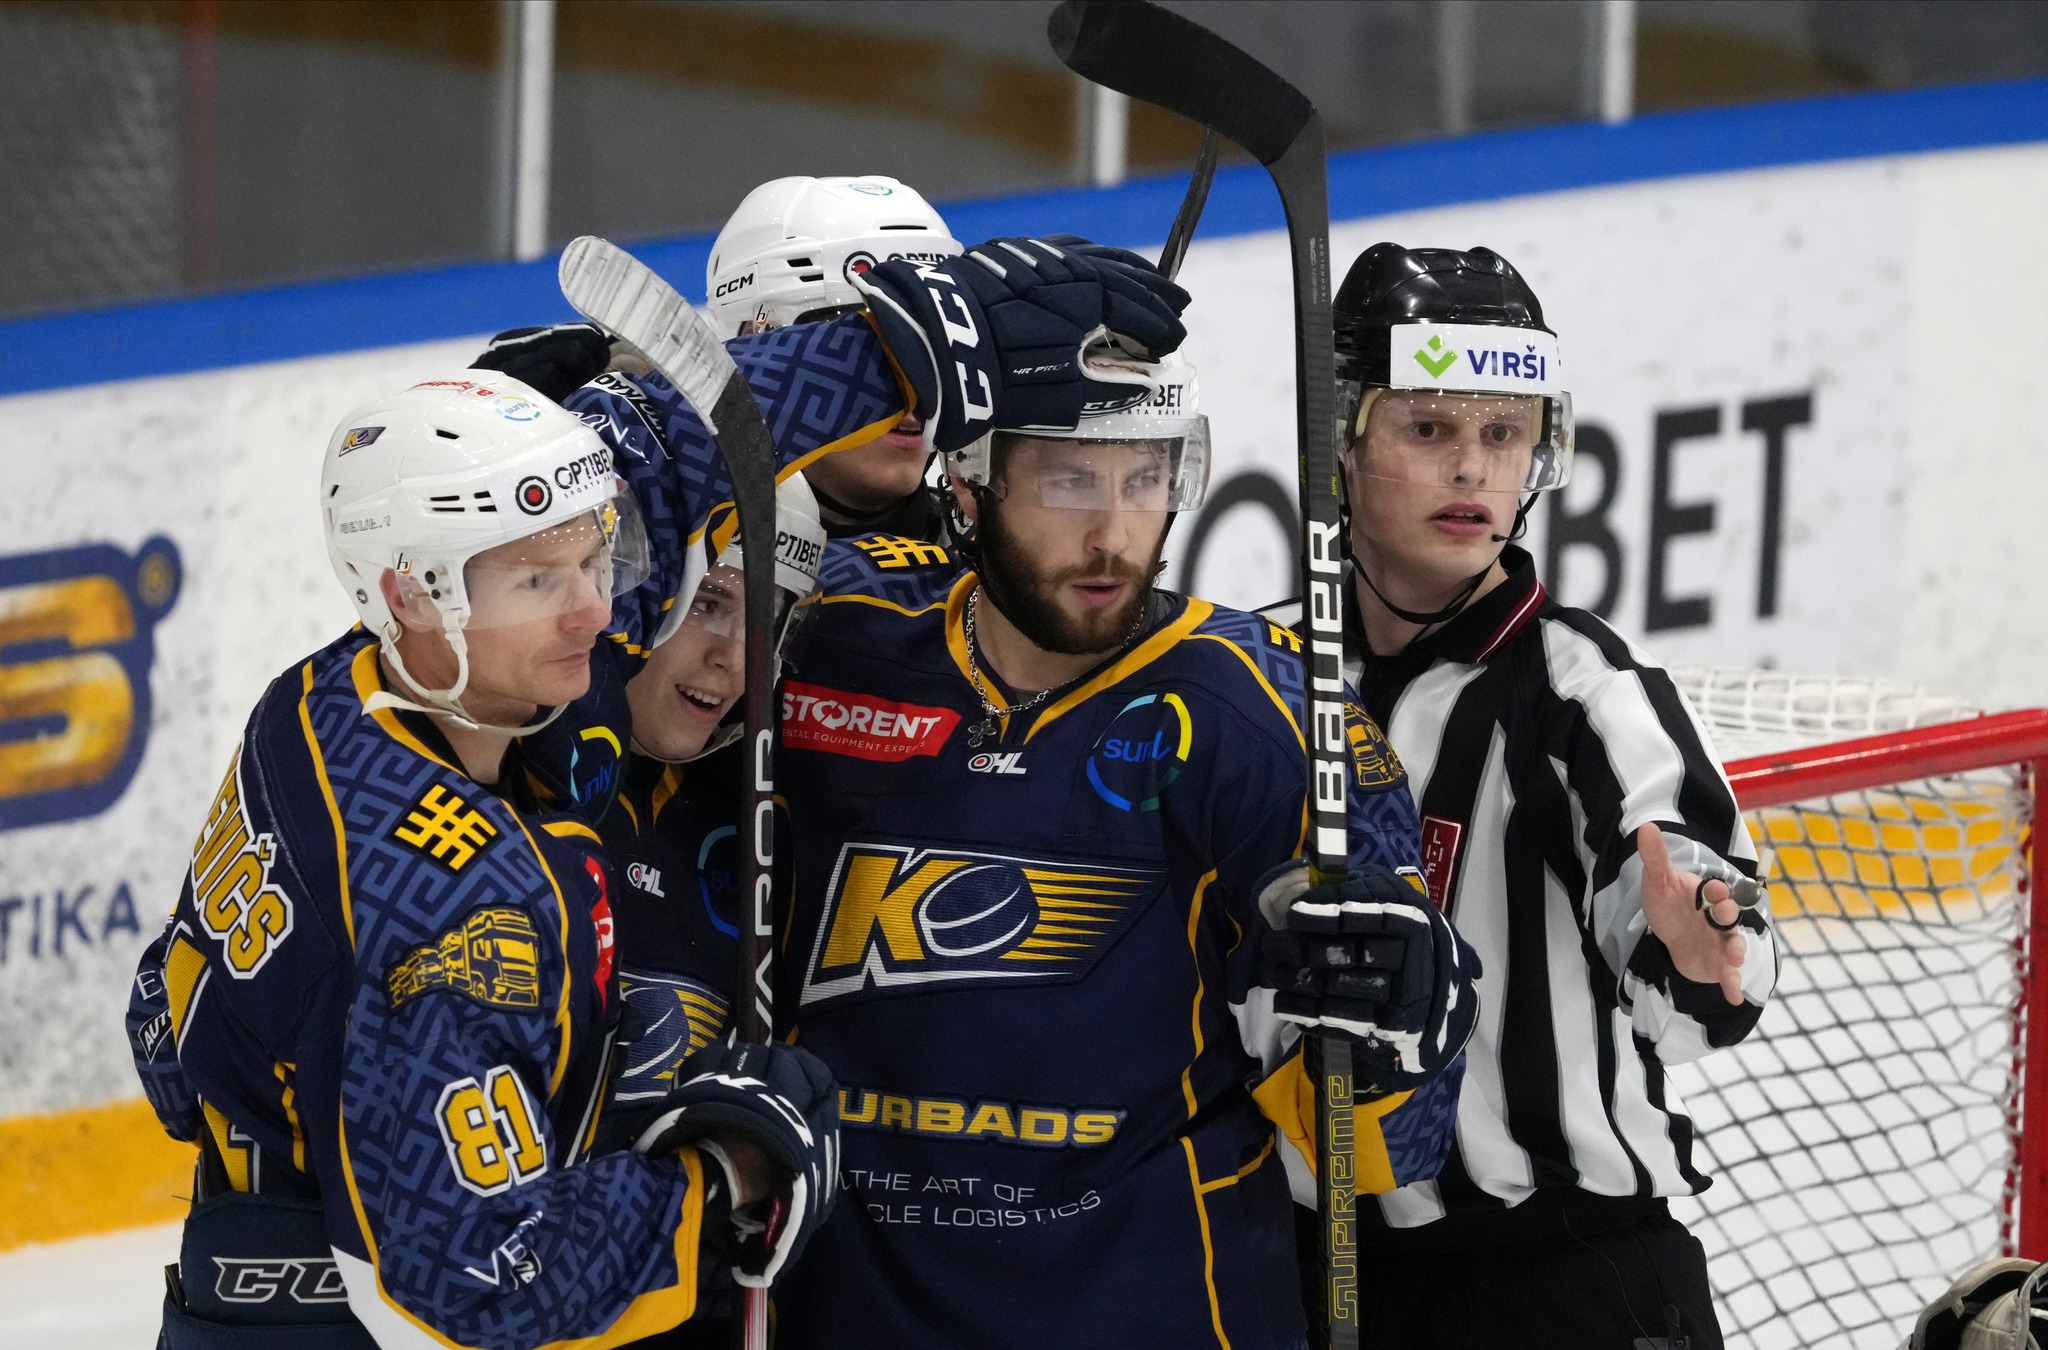 HK Kurbads eighth season in the Latvian Hockey League (OHL) ended with a loss in the semifinals